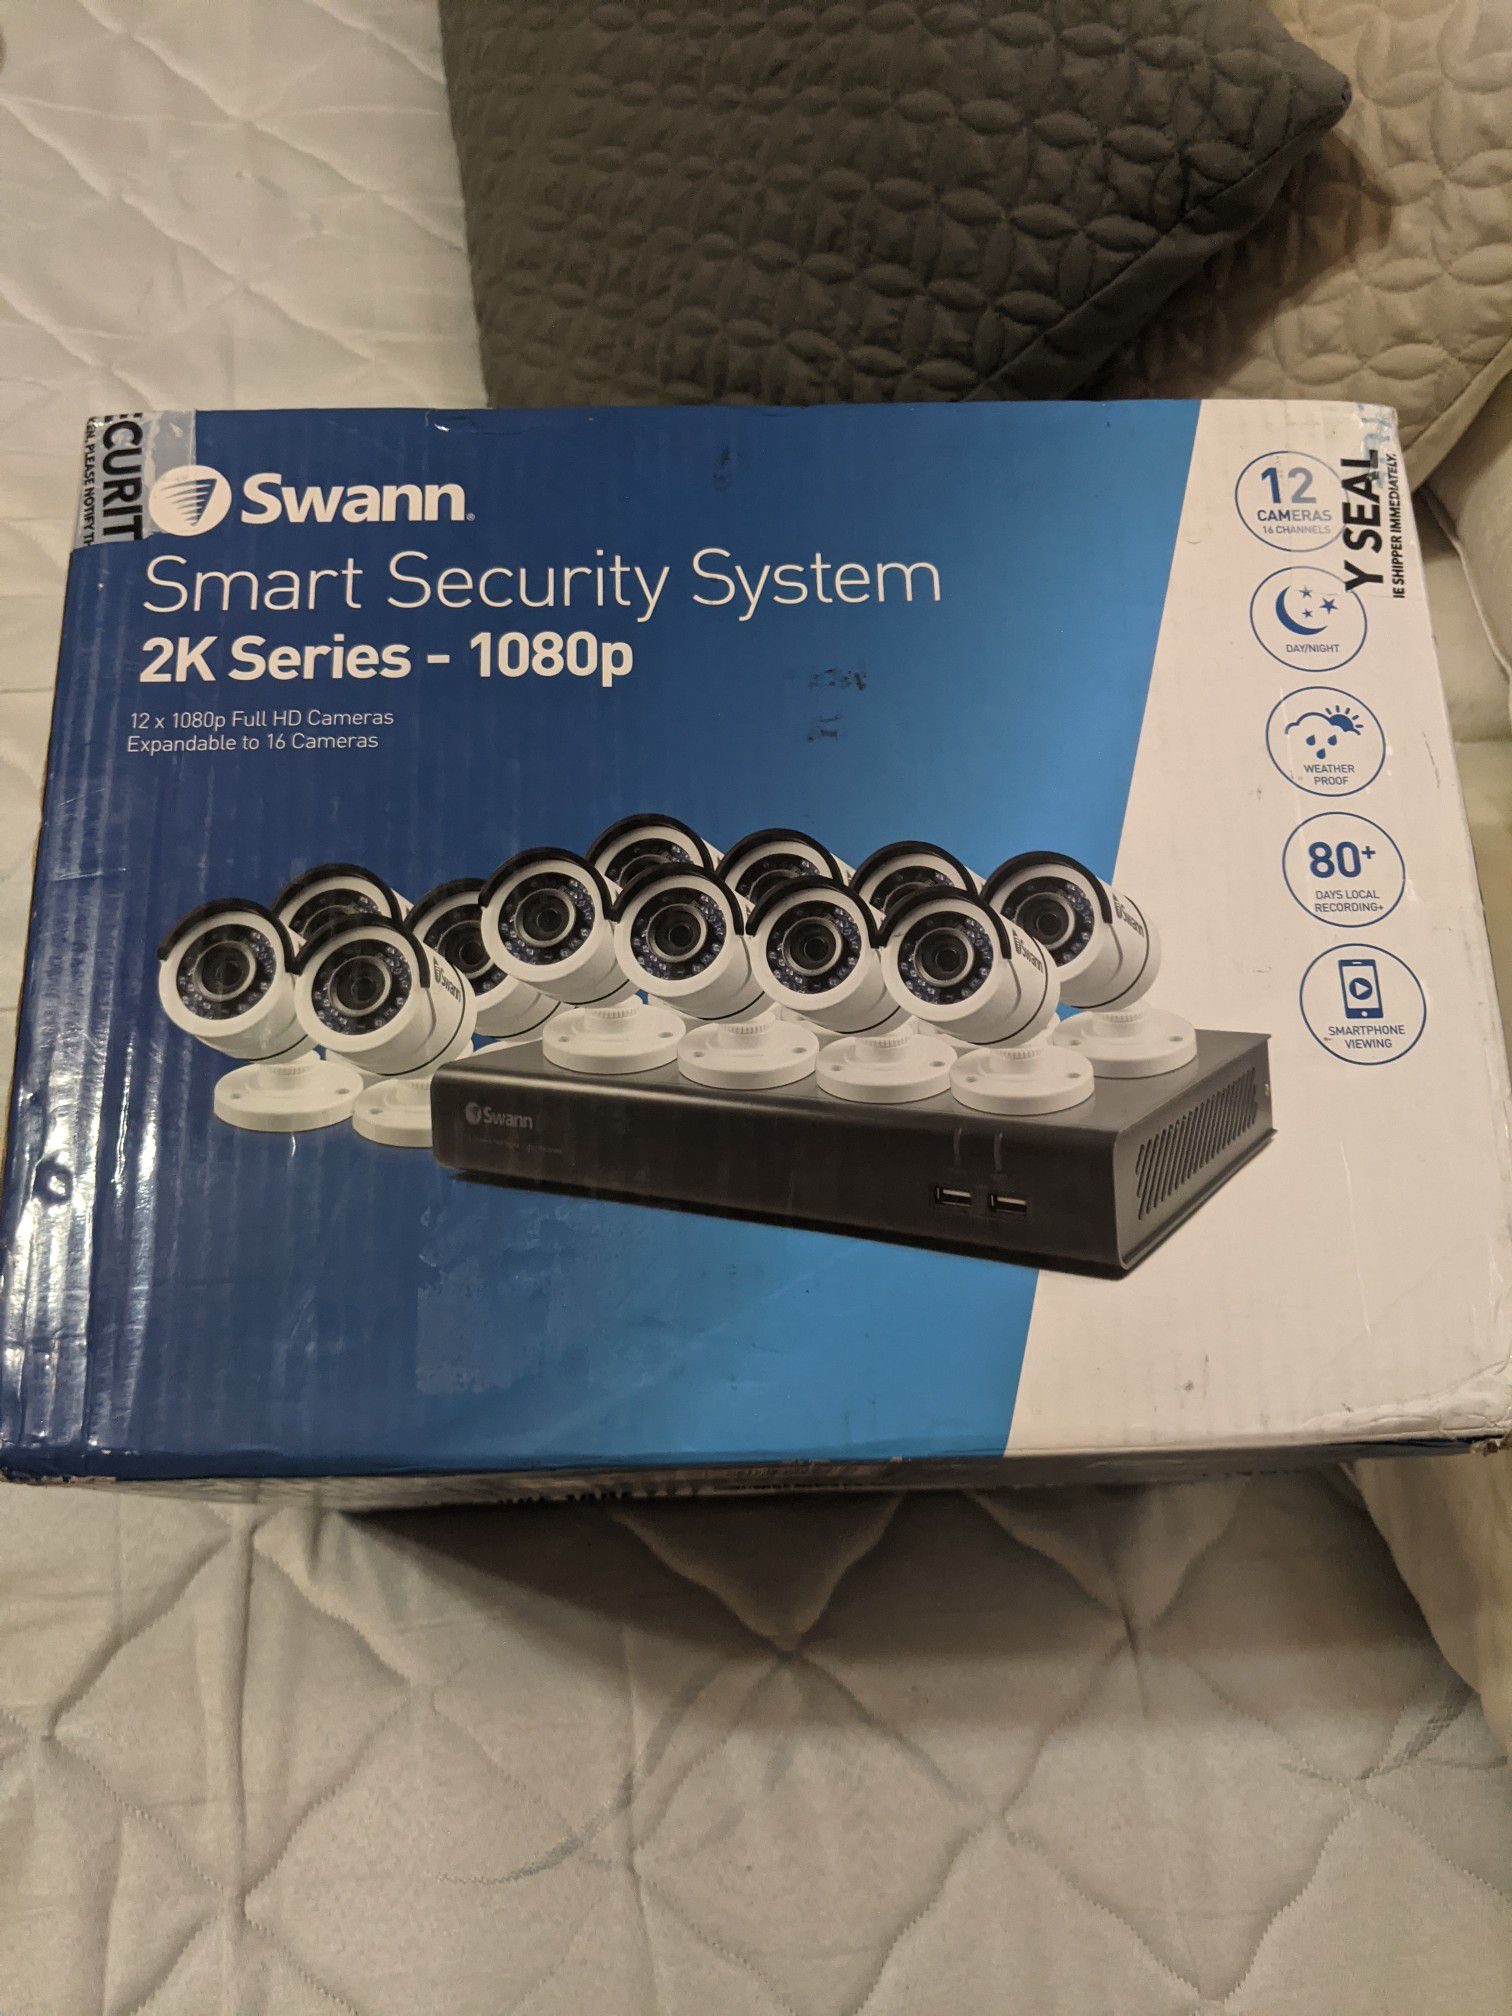 Swann smart security system 12 camera